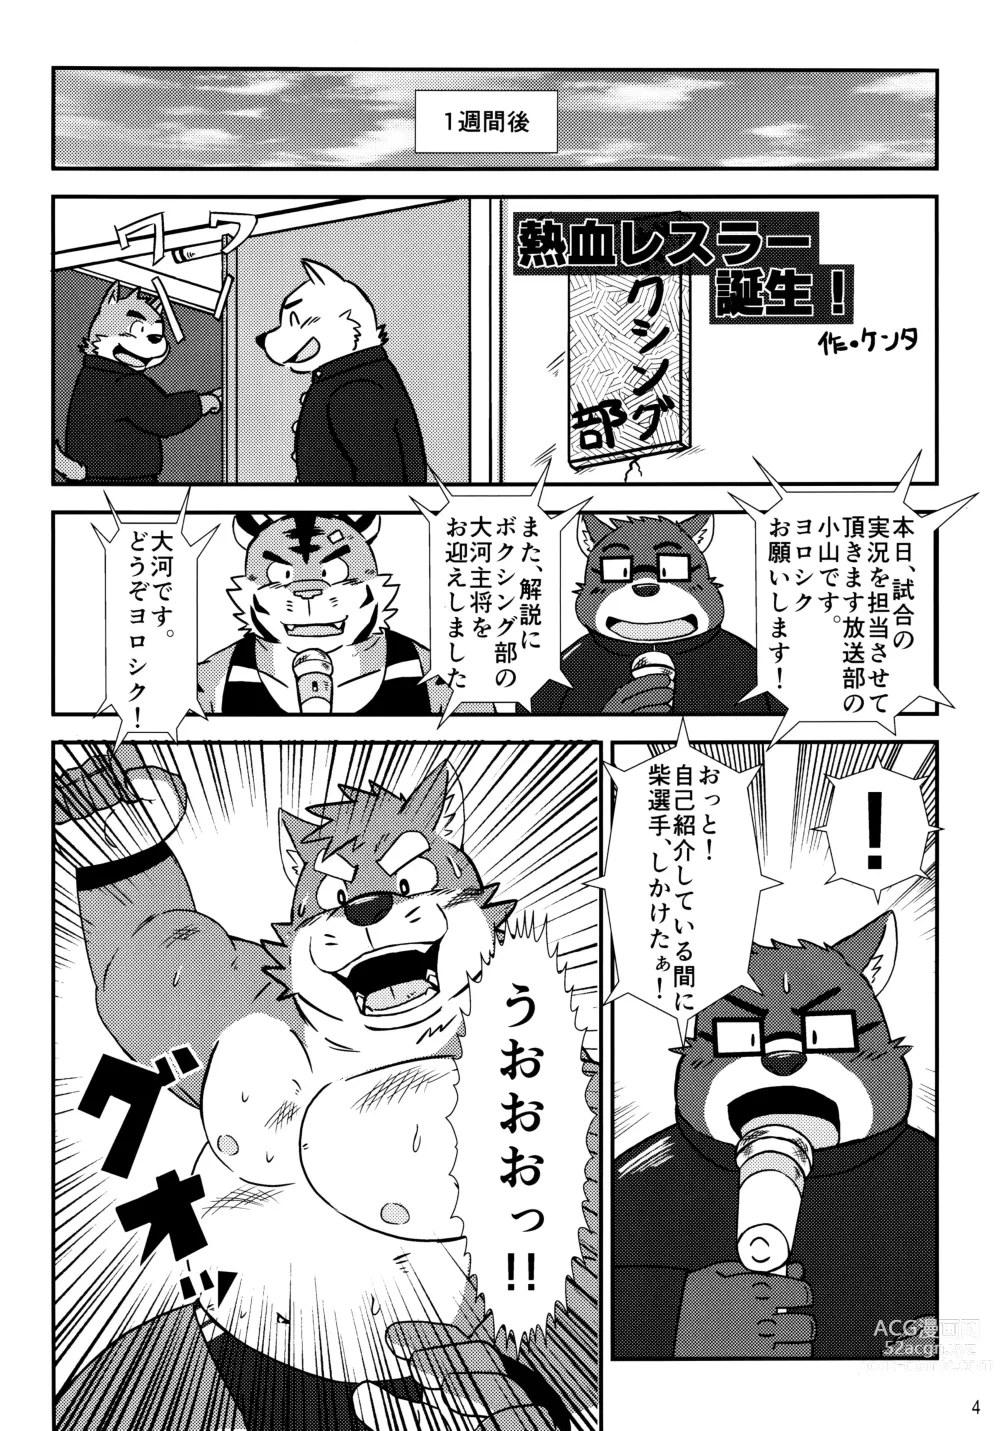 Page 5 of doujinshi BFW -BEAST FIGHTER WRESTLING-